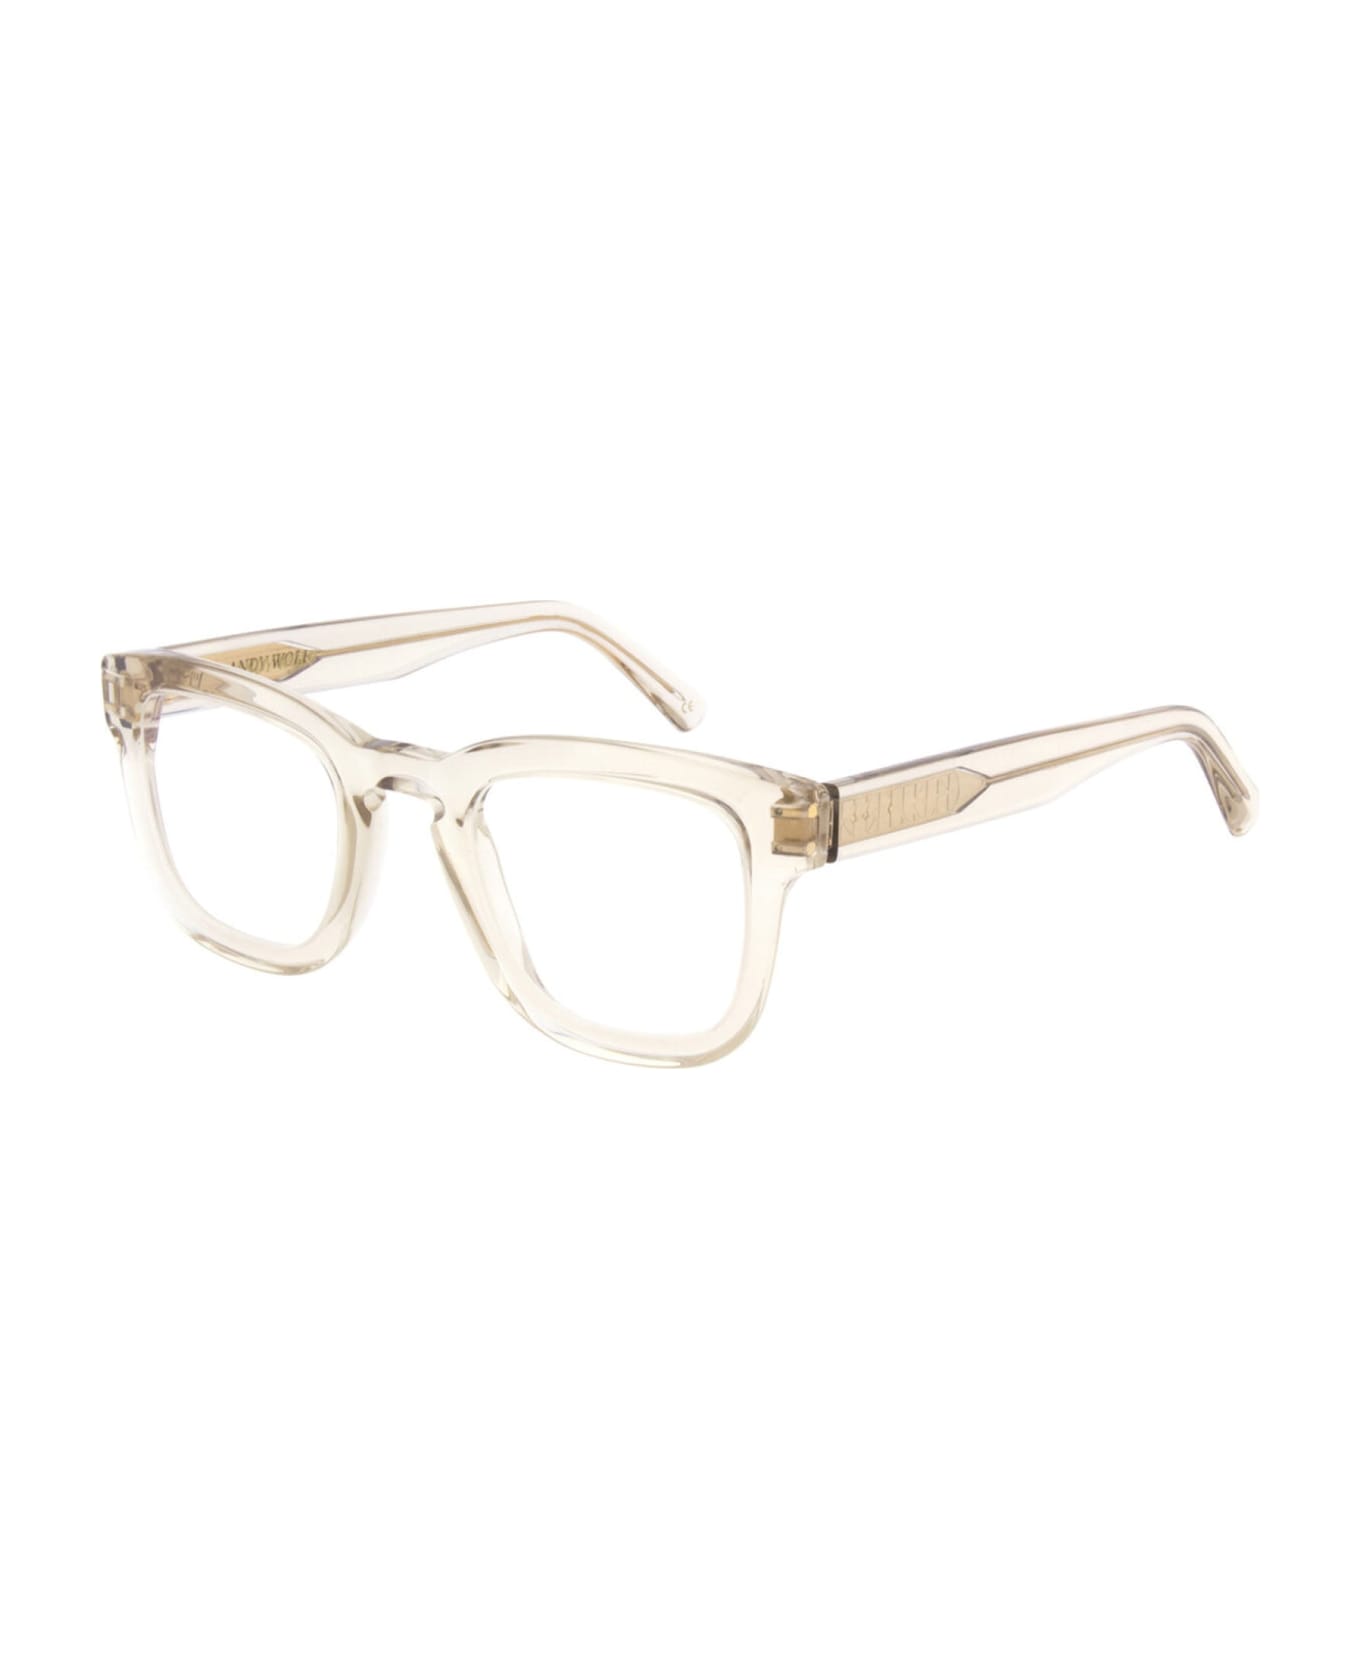 Andy Wolf Aw01 - Beige / Gold Glasses - transparent beige